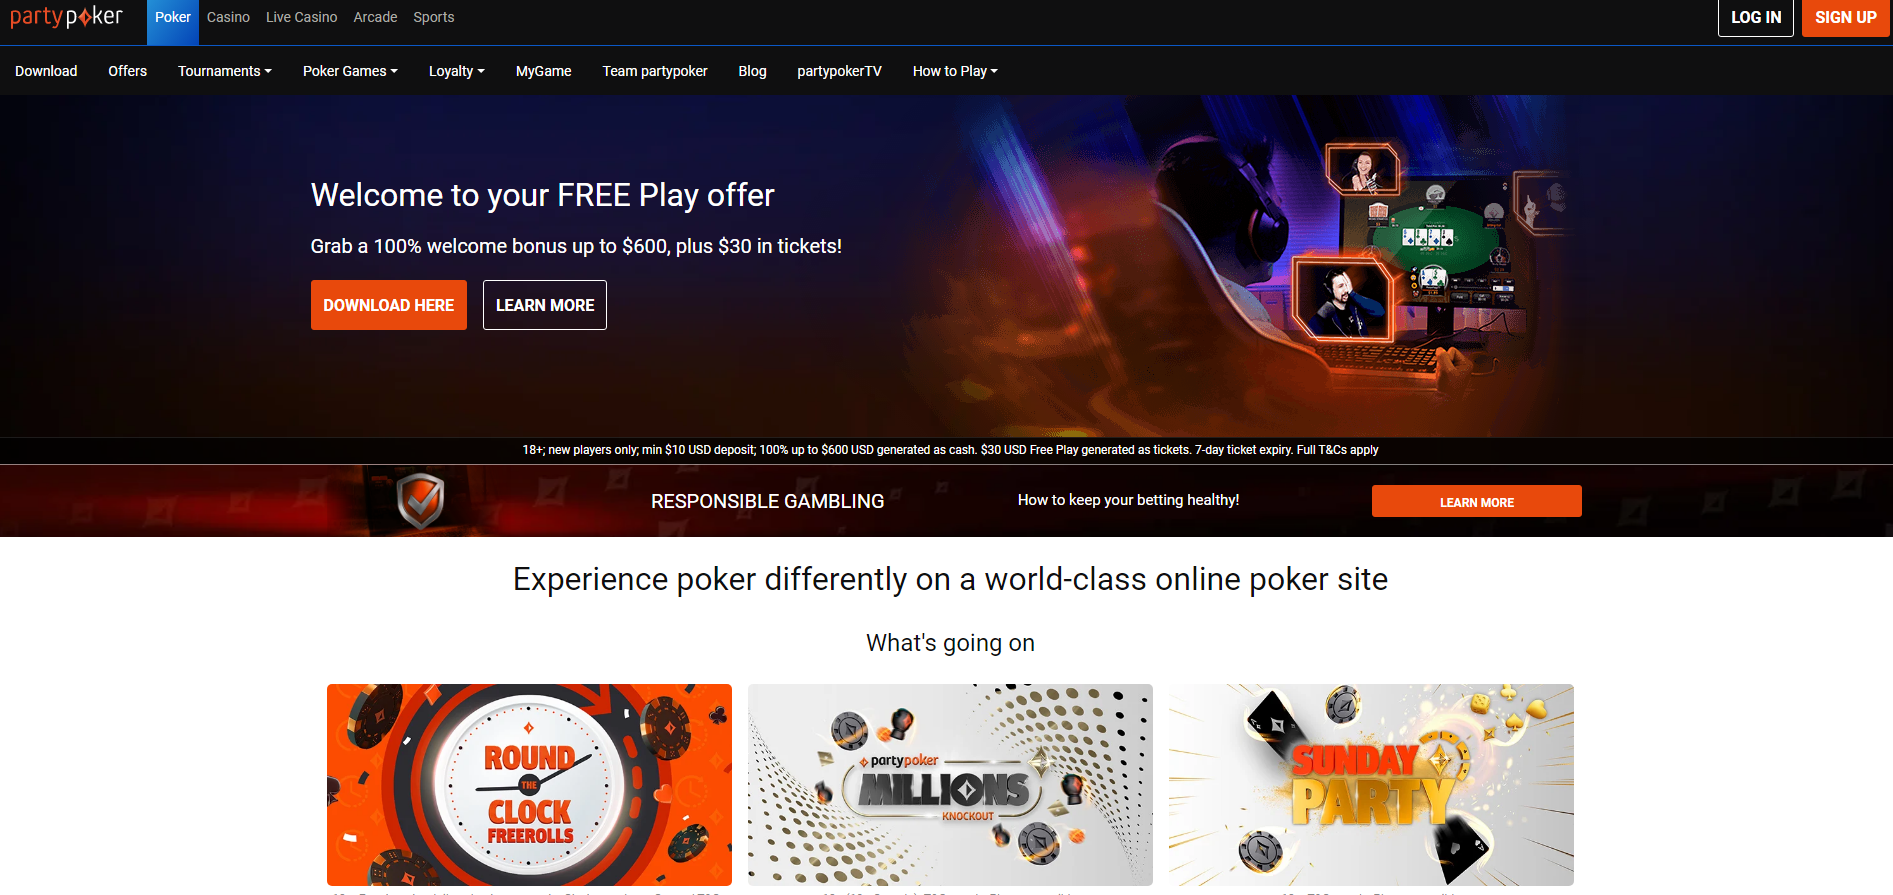 Why using a VPN is insufficient for accessing Partypoker in the United States